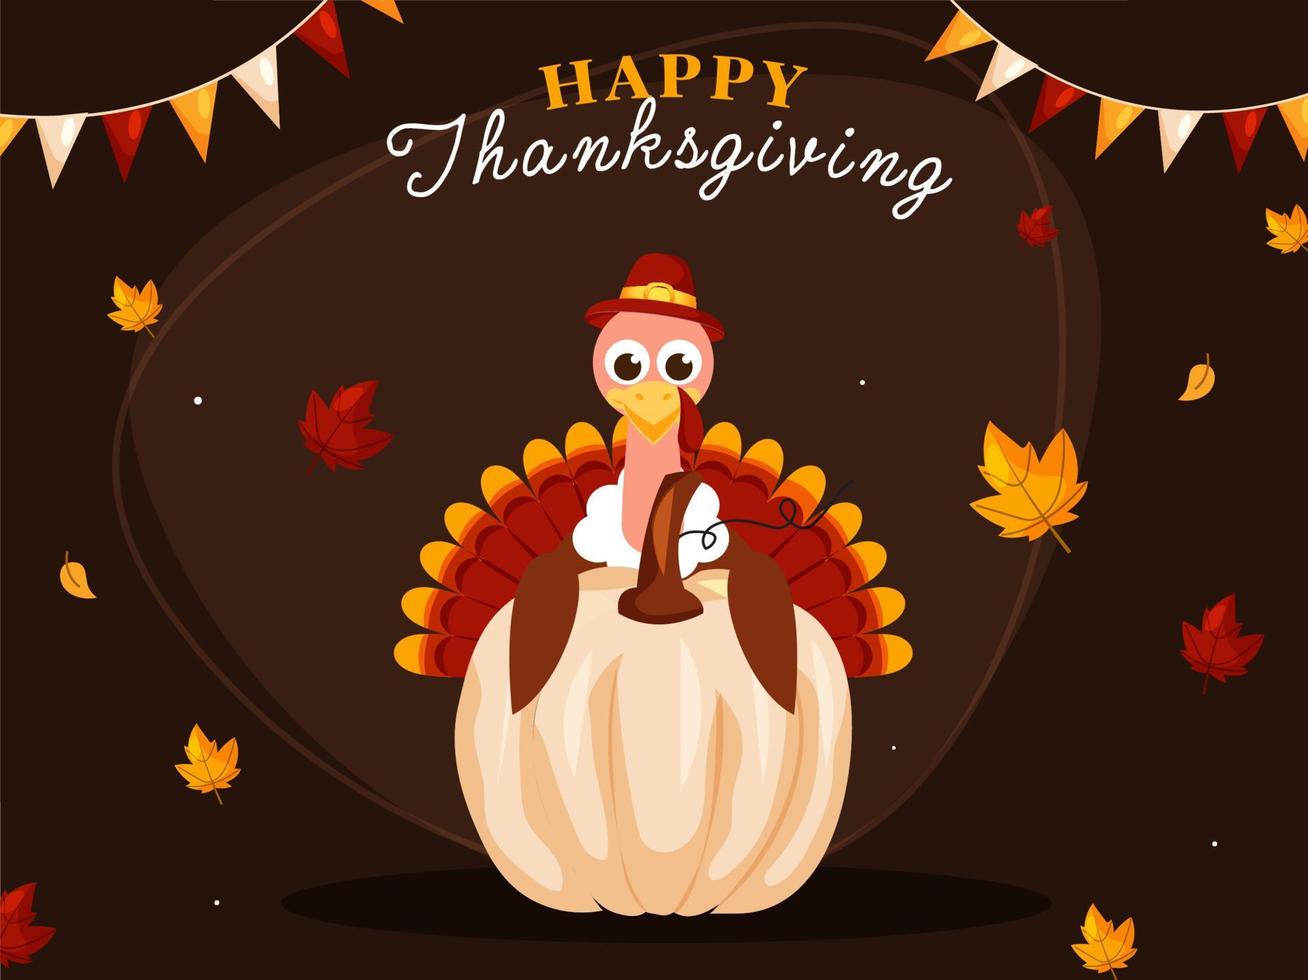 Illustration of Turkey Bird Wearing Pilgrim Hat with Pumpkin and Autumn Leaves Falling on Brown Background for Happy Thanksgiving Day. vector